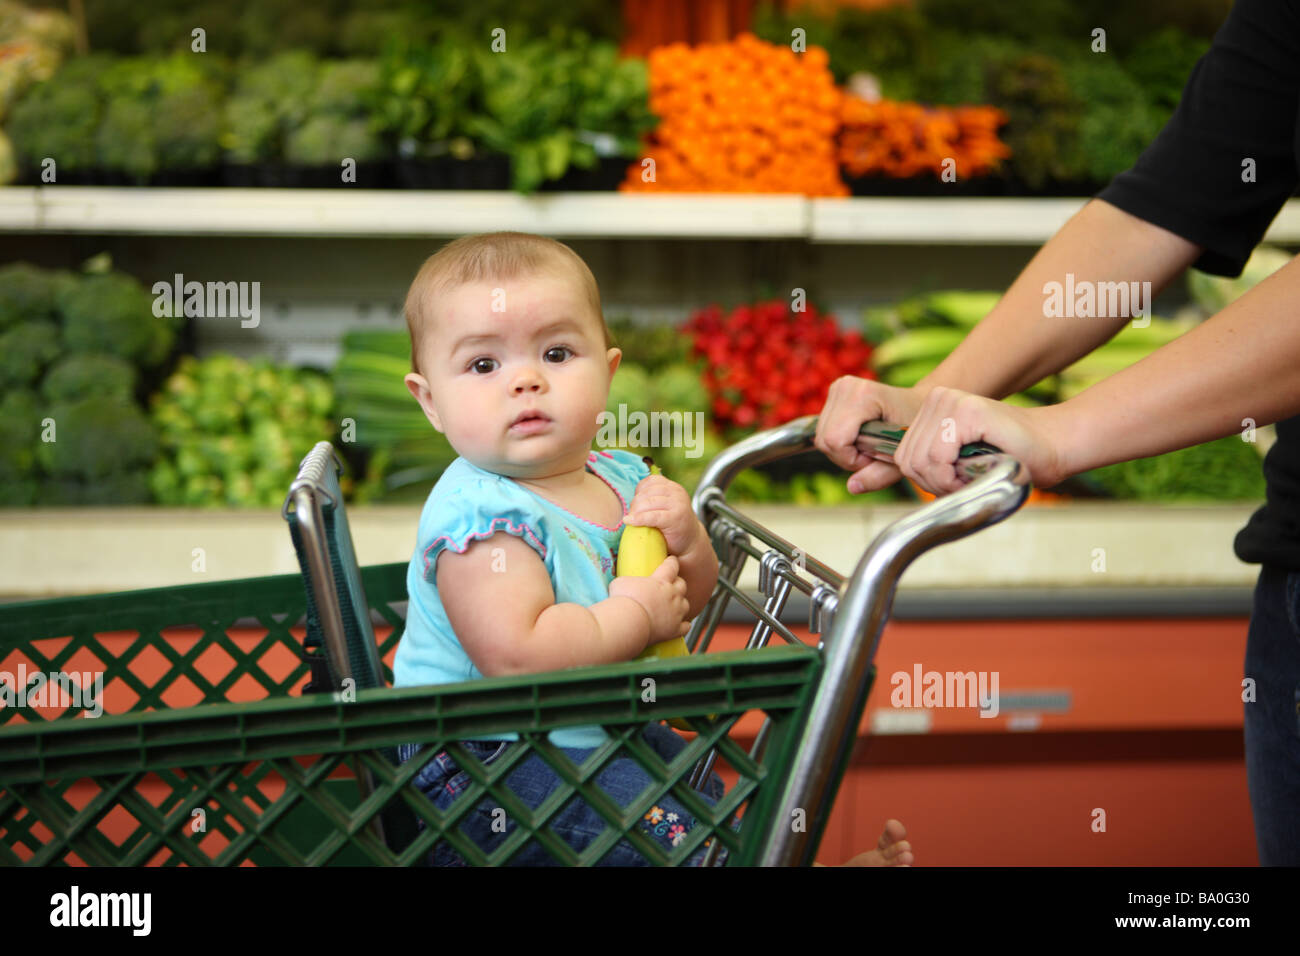 Baby in shopping cart in produce section of grocery store Stock Photo